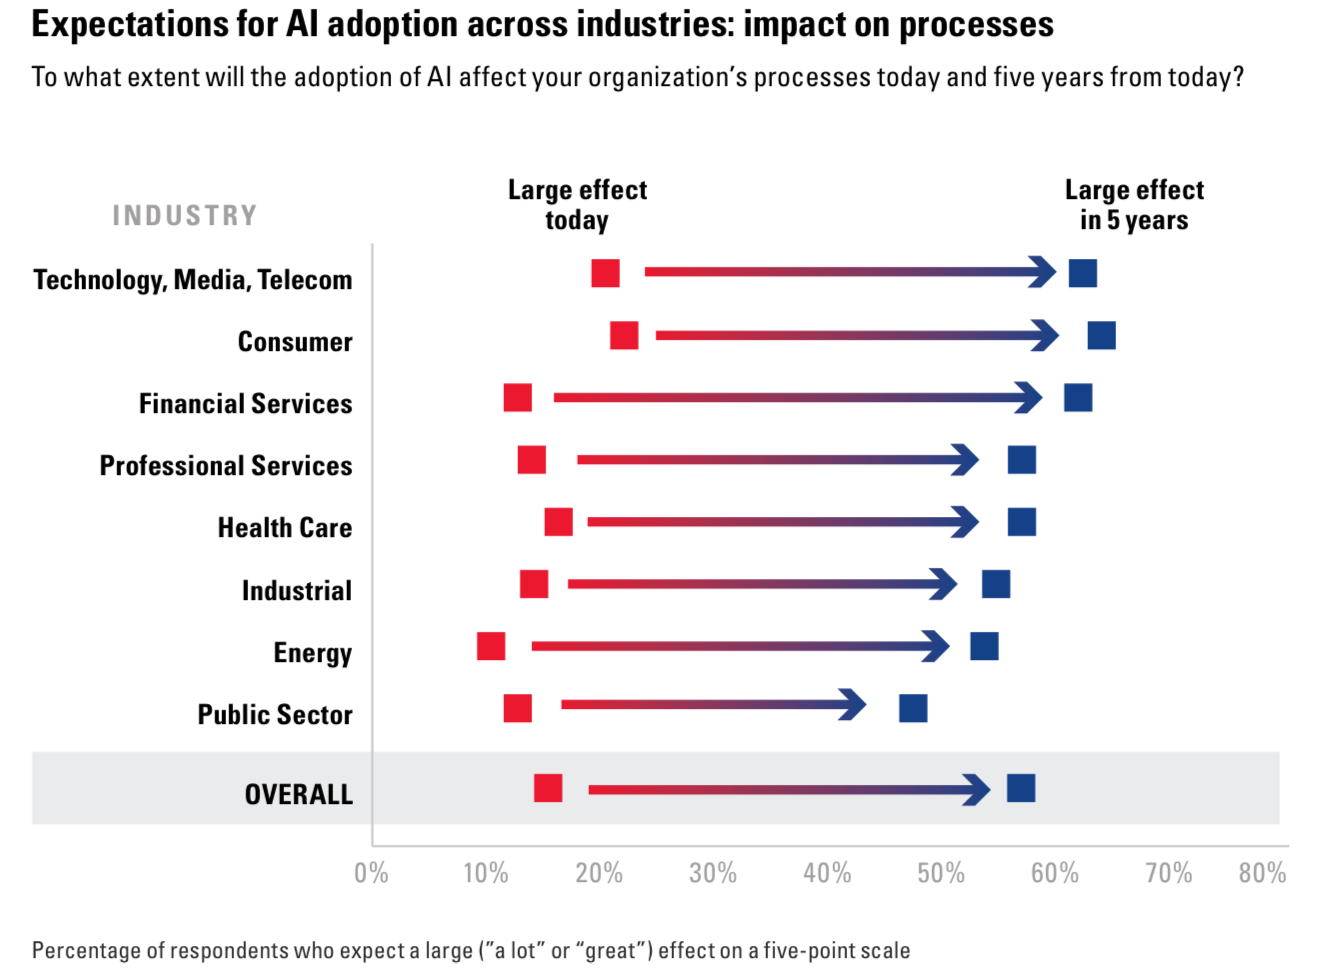 Figure 3: Expectations for AI adoption across industries: impact on processes (BCG & MIT 2017)